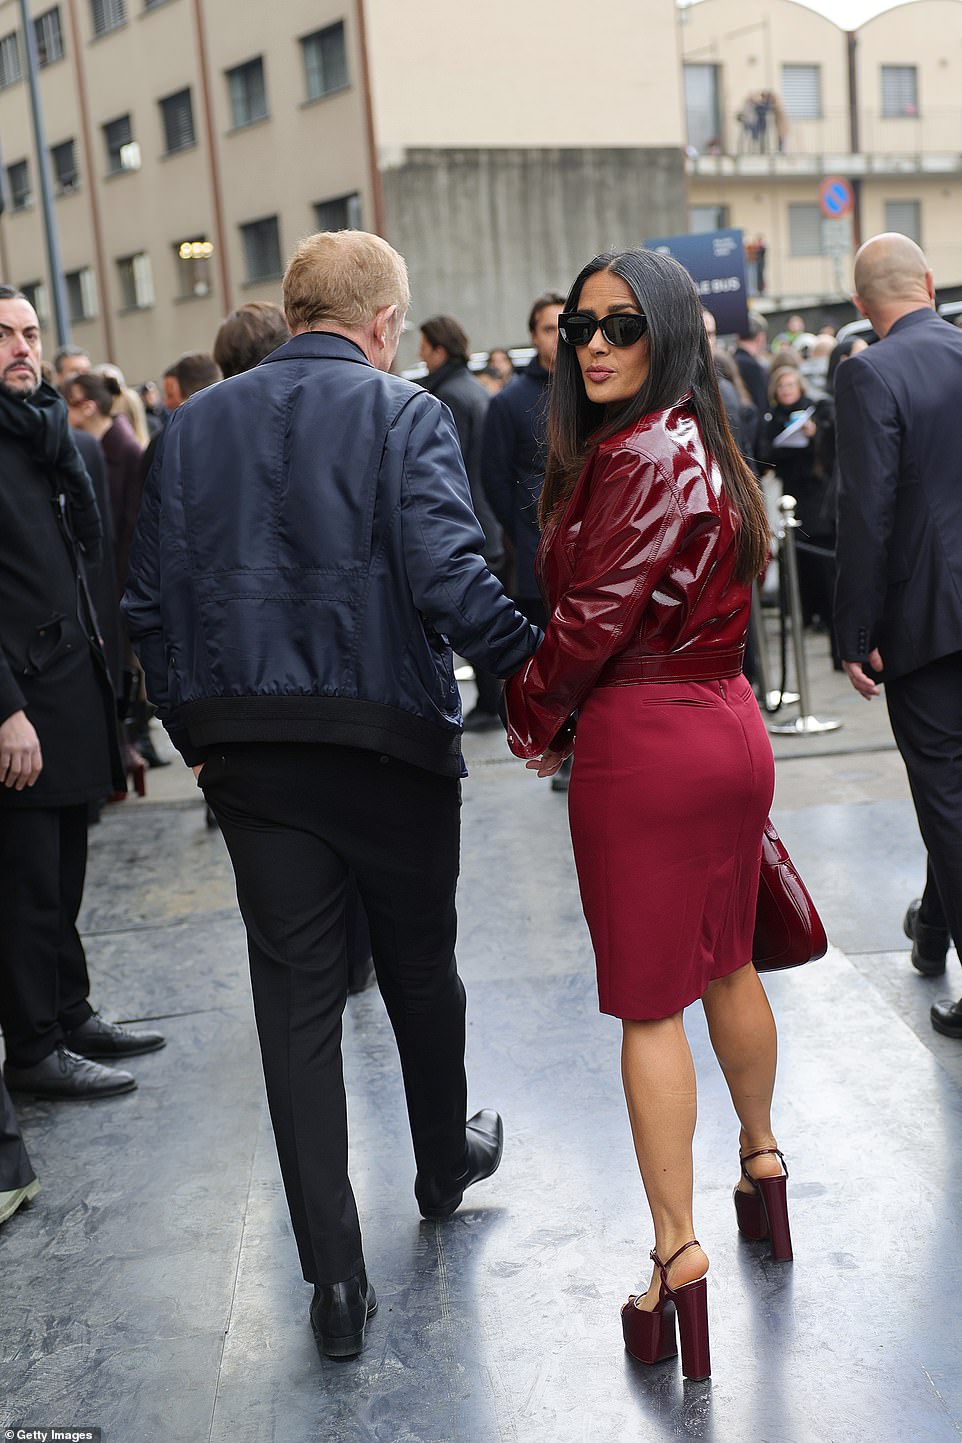 Salma, 57, looked stylish as she opted for a PVC burgundy jacket with black cuffs and a matching red skirt as she pouted at the camera